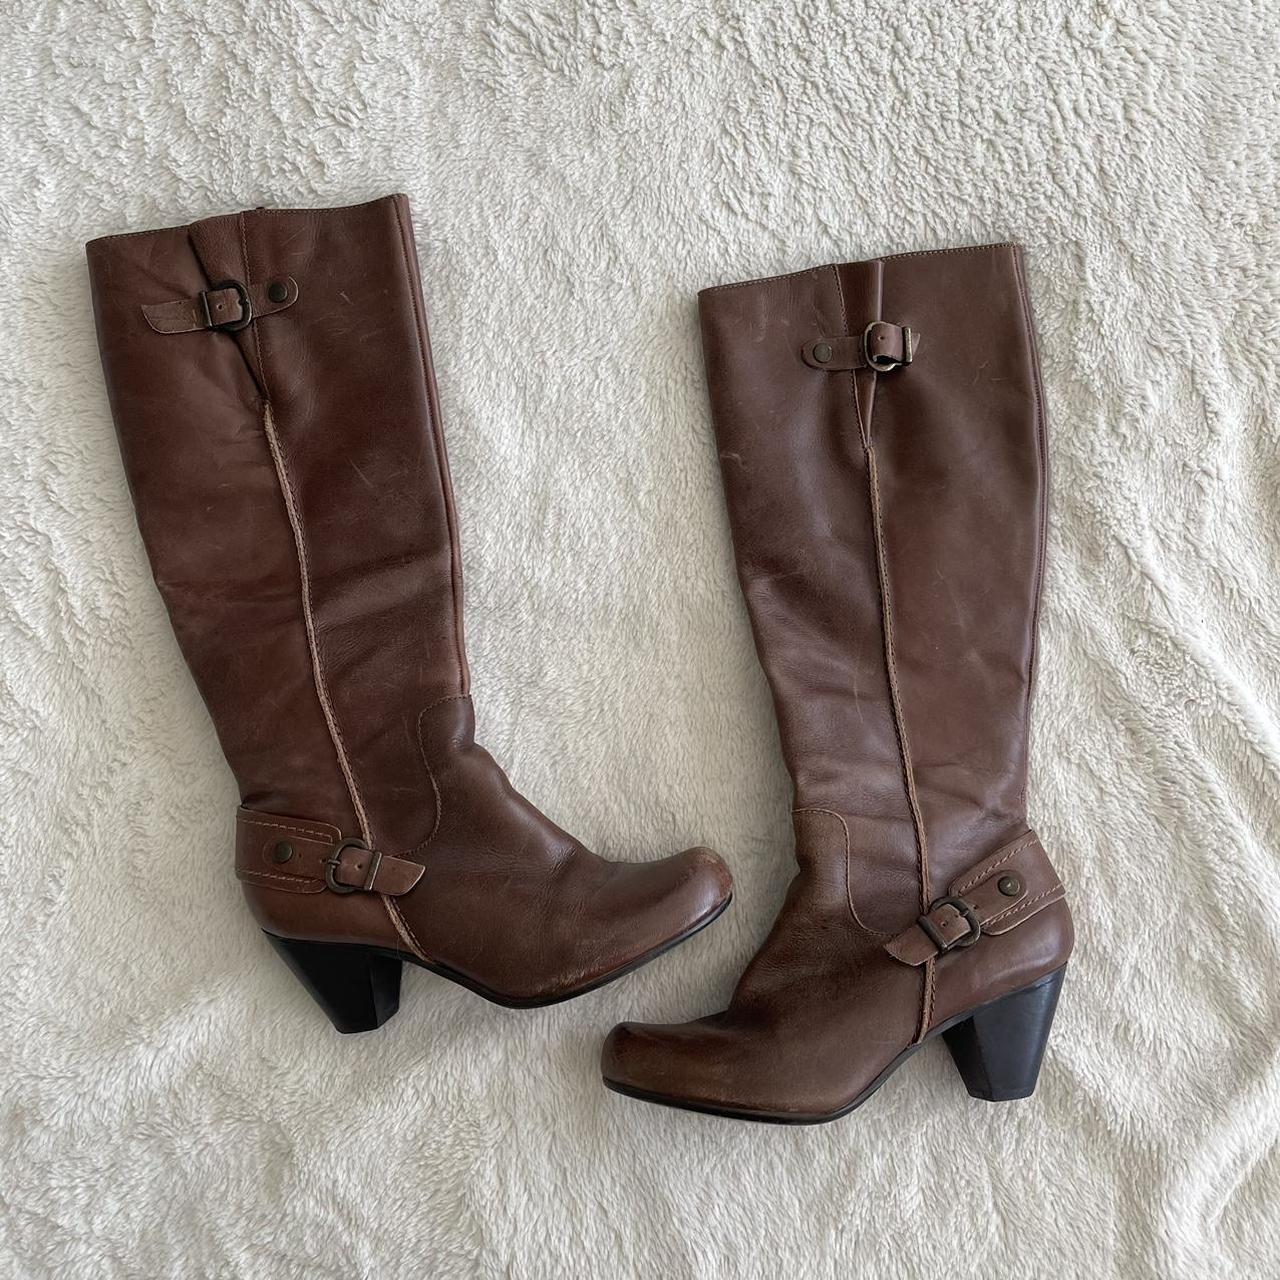 Riding boots - Size 6 ★ FREE BUNDLE SHIPPING ★... - Depop